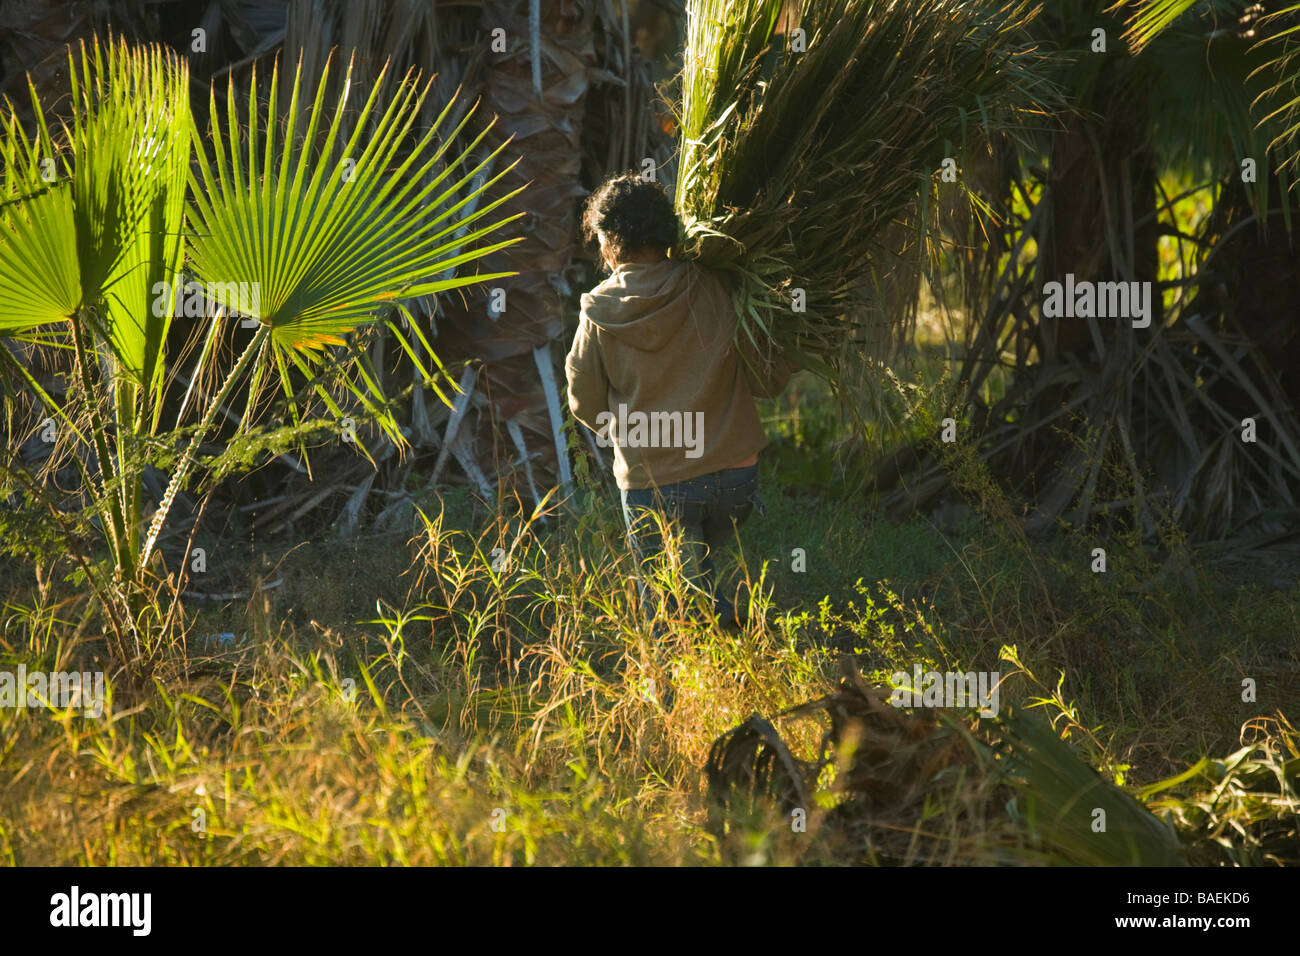 MEXICO Todos Santos Mexican woman carrying palm tree branches on her shoulder walking among trees viewed from behind Stock Photo